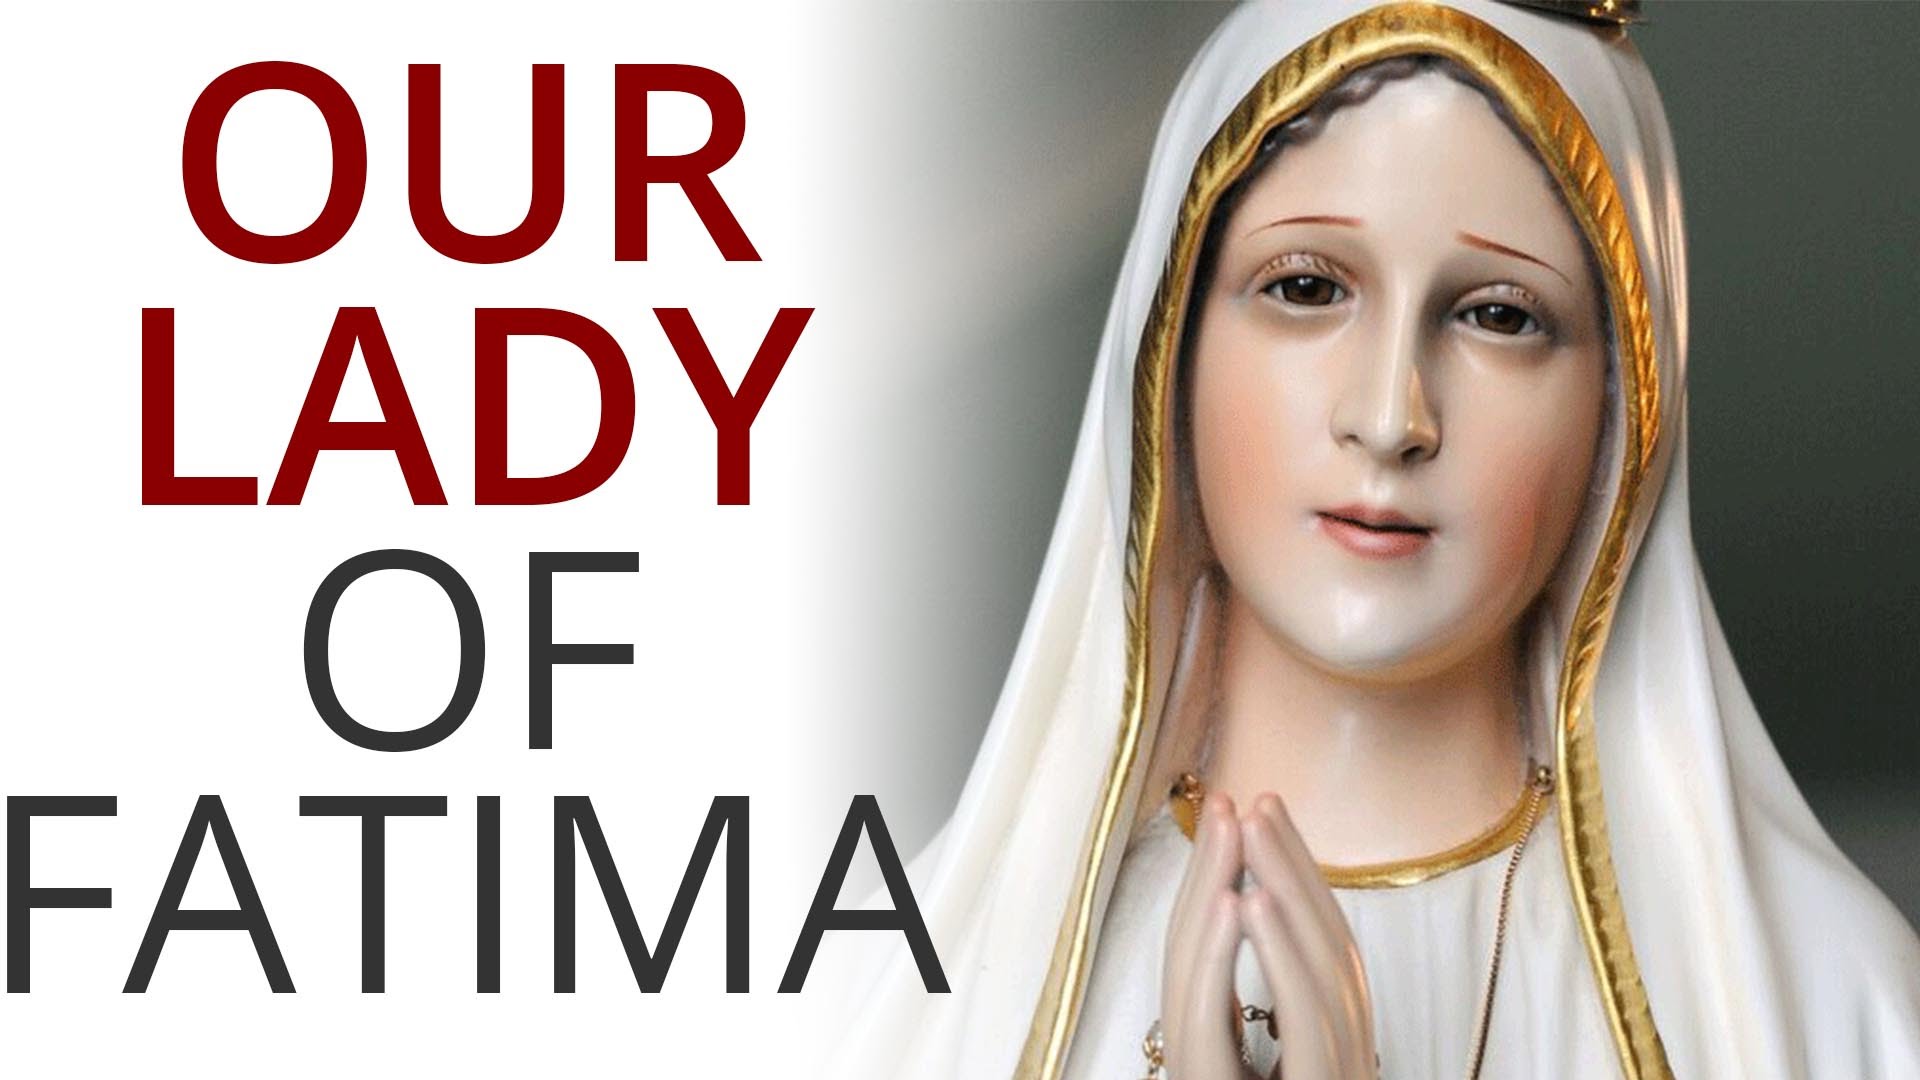 Ideas for Celebrating the 100th Anniversary of Our Lady of Fatima